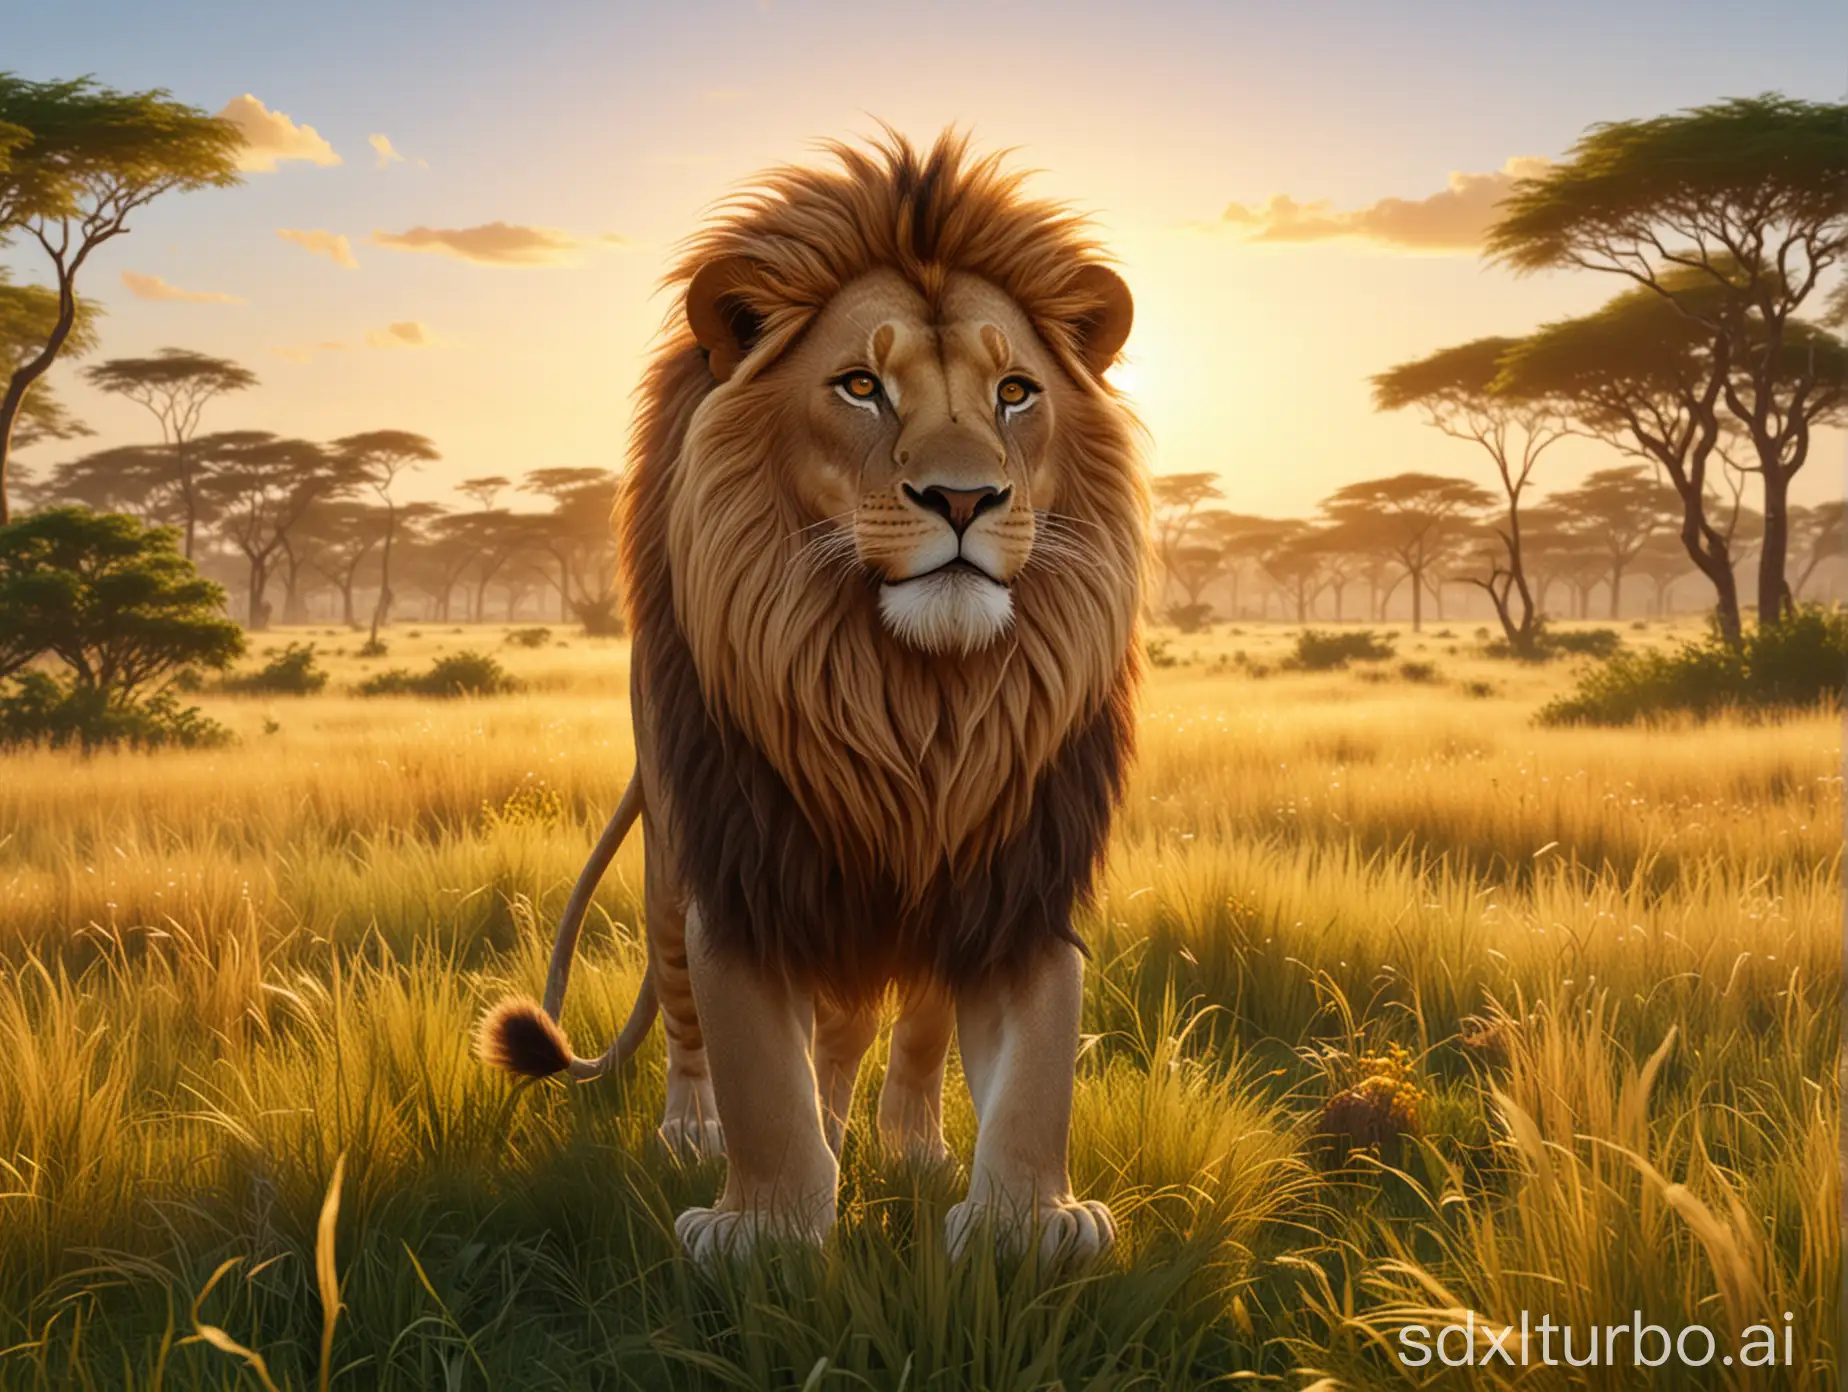 Cartoon-Lion-Standing-in-Vast-Grass-Field-Heart-of-the-African-Forest-Under-Morning-Sunshine